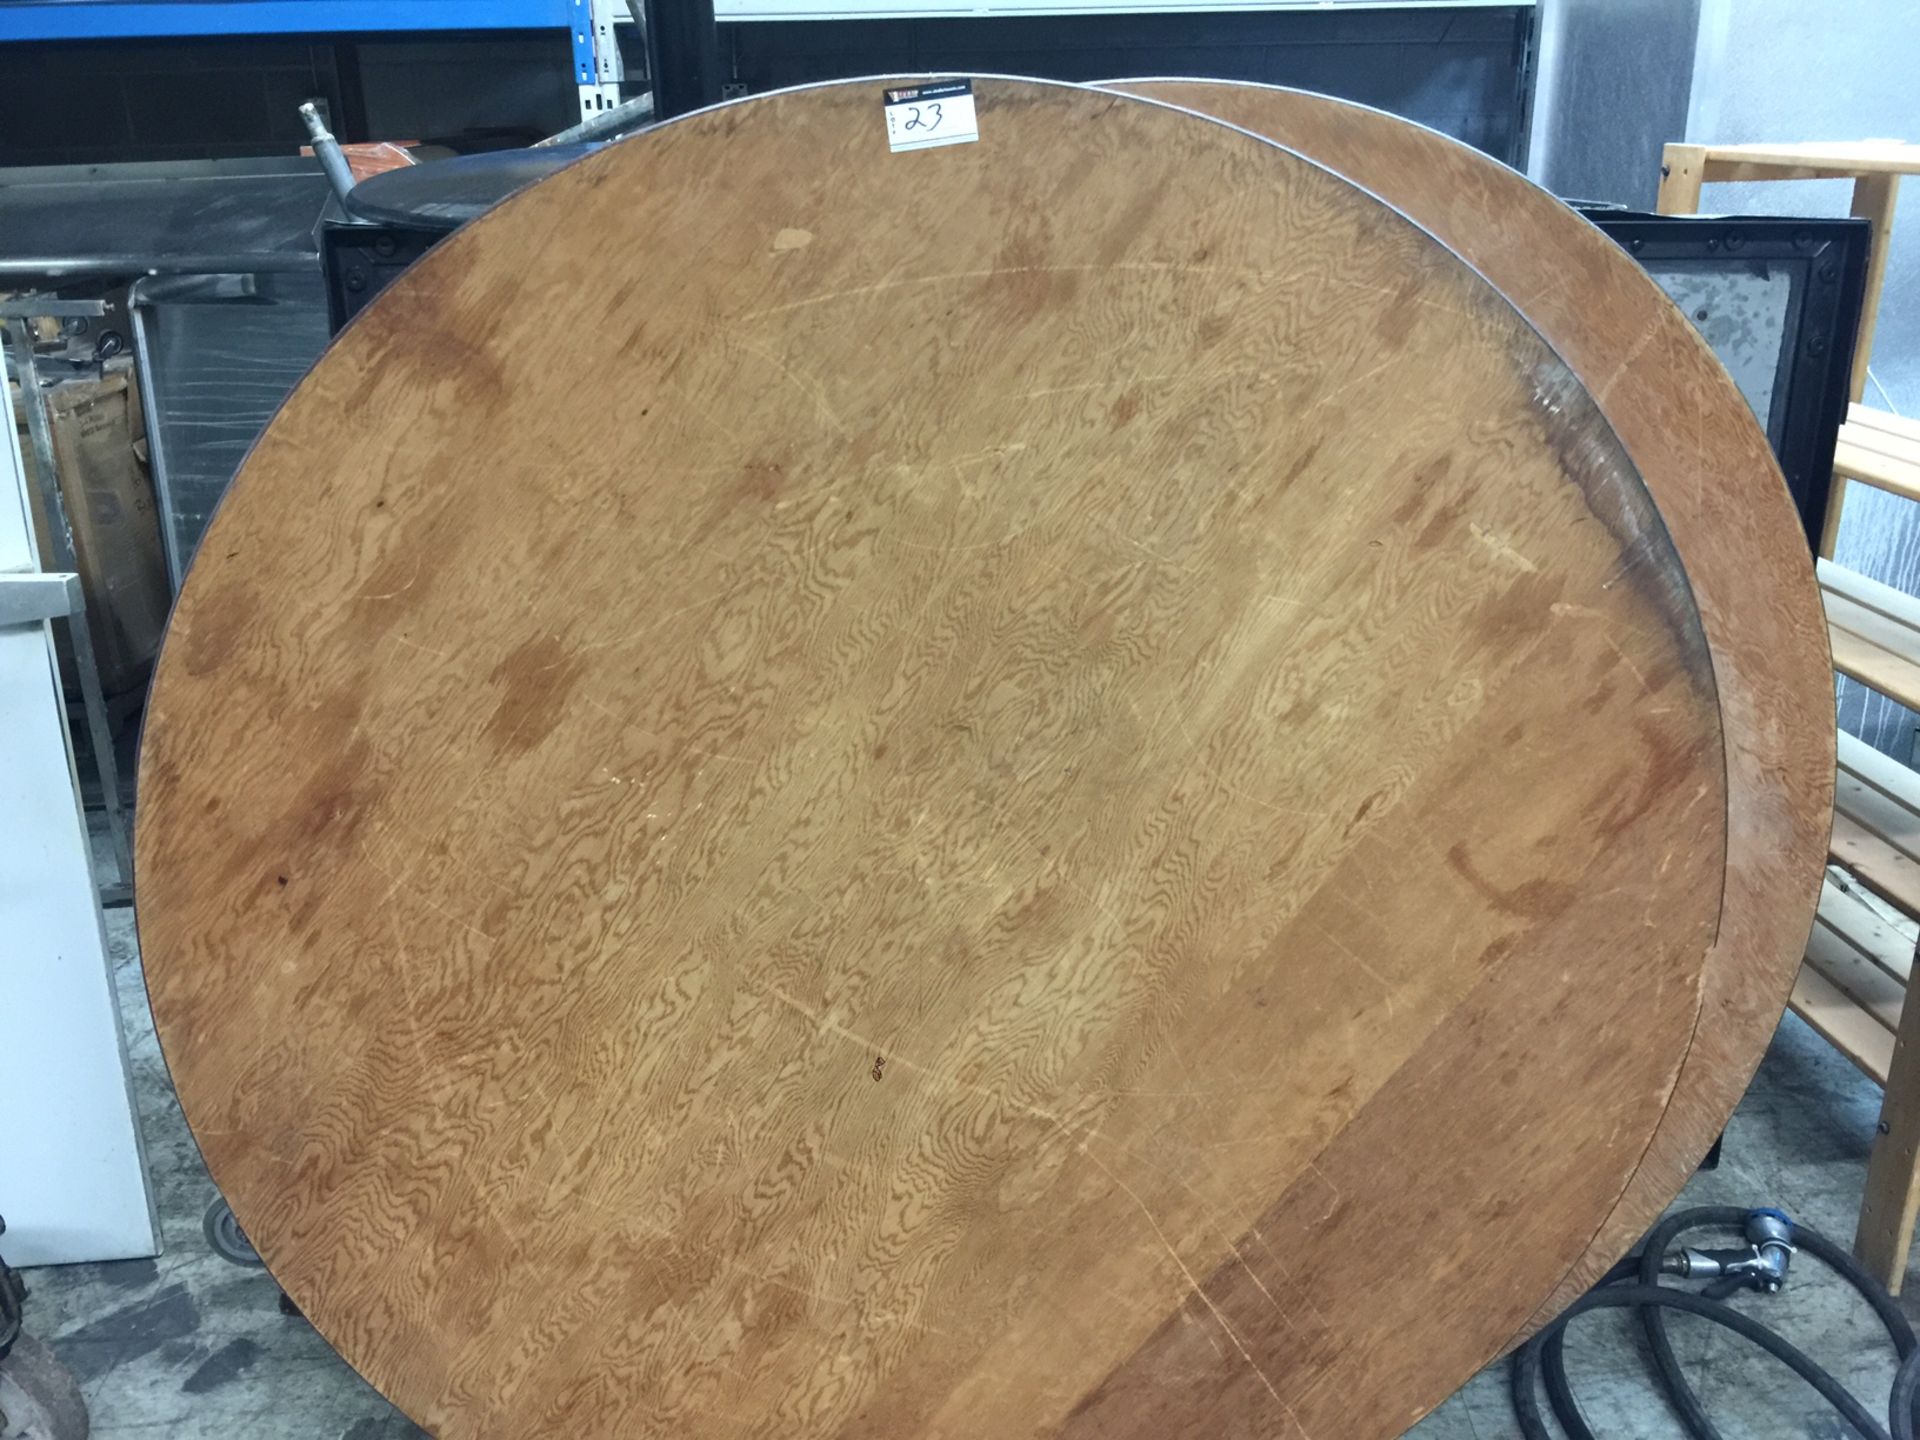 LOT OF 2 ROUND BANQUET TABLES (5FT) - Image 3 of 3